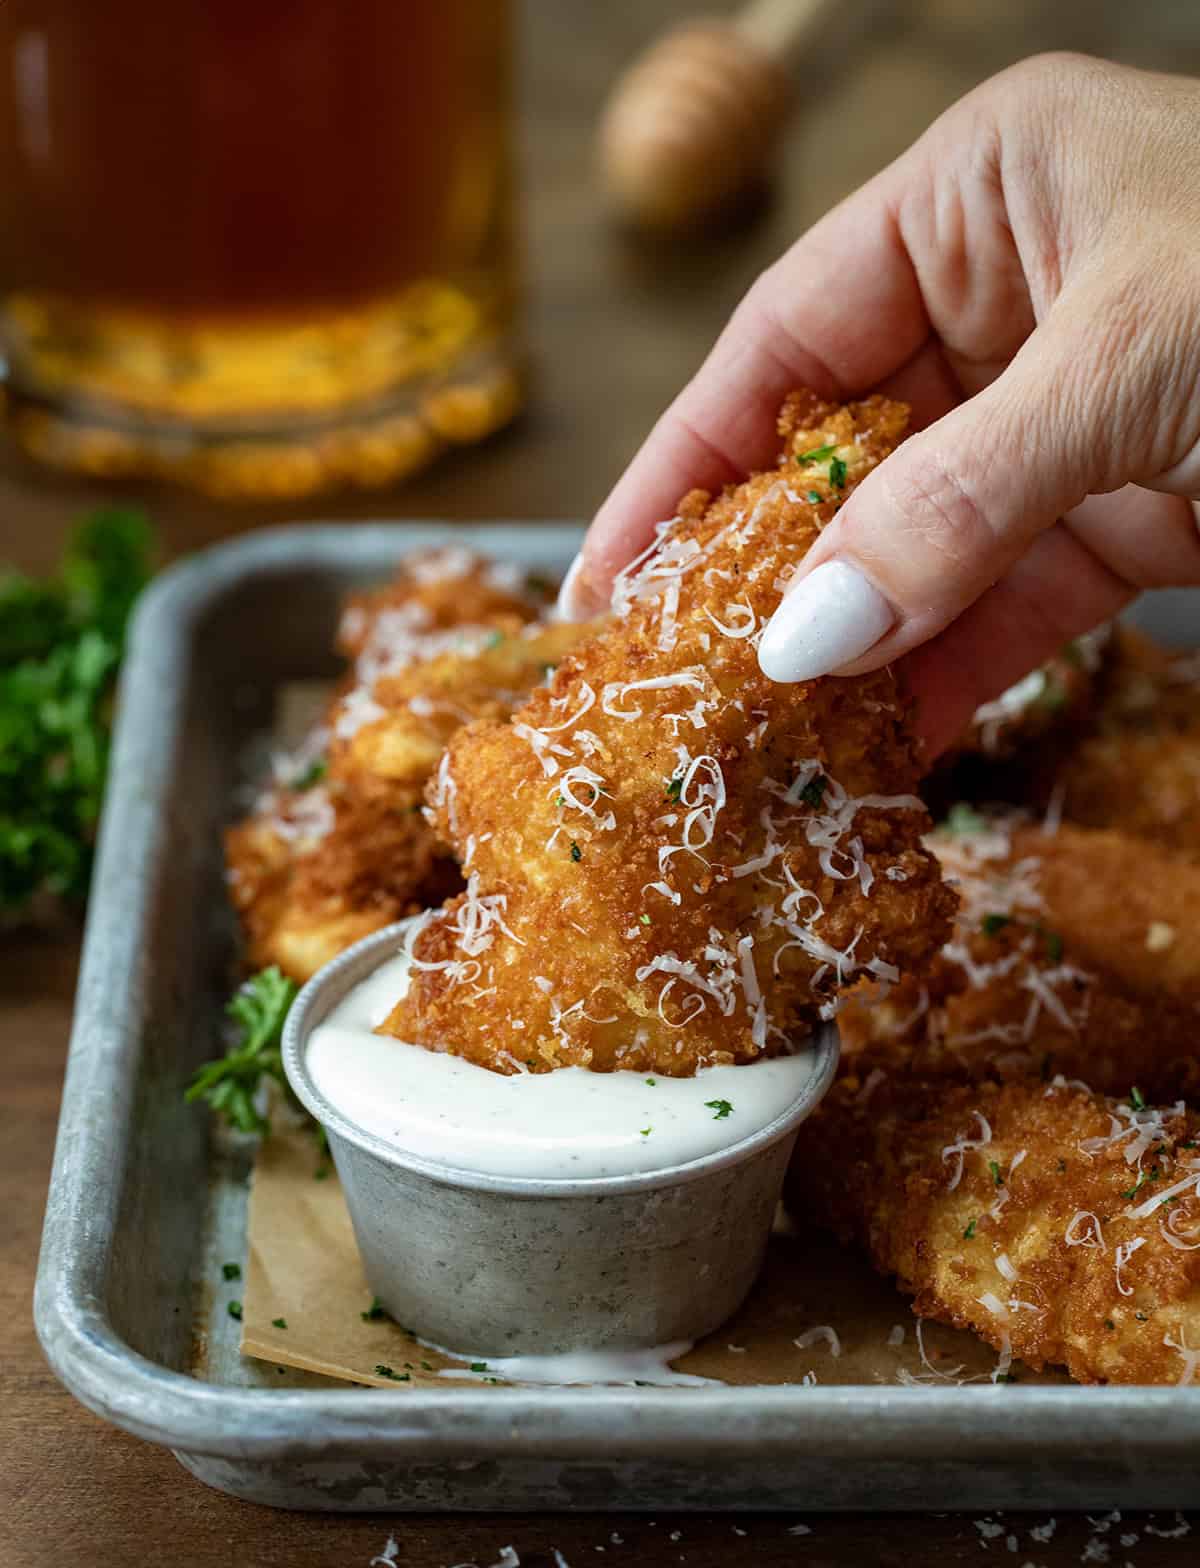 Hand dipping a Garlic Parmesan Chicken Tender into a bowl of ranch dressing on a wooden table.